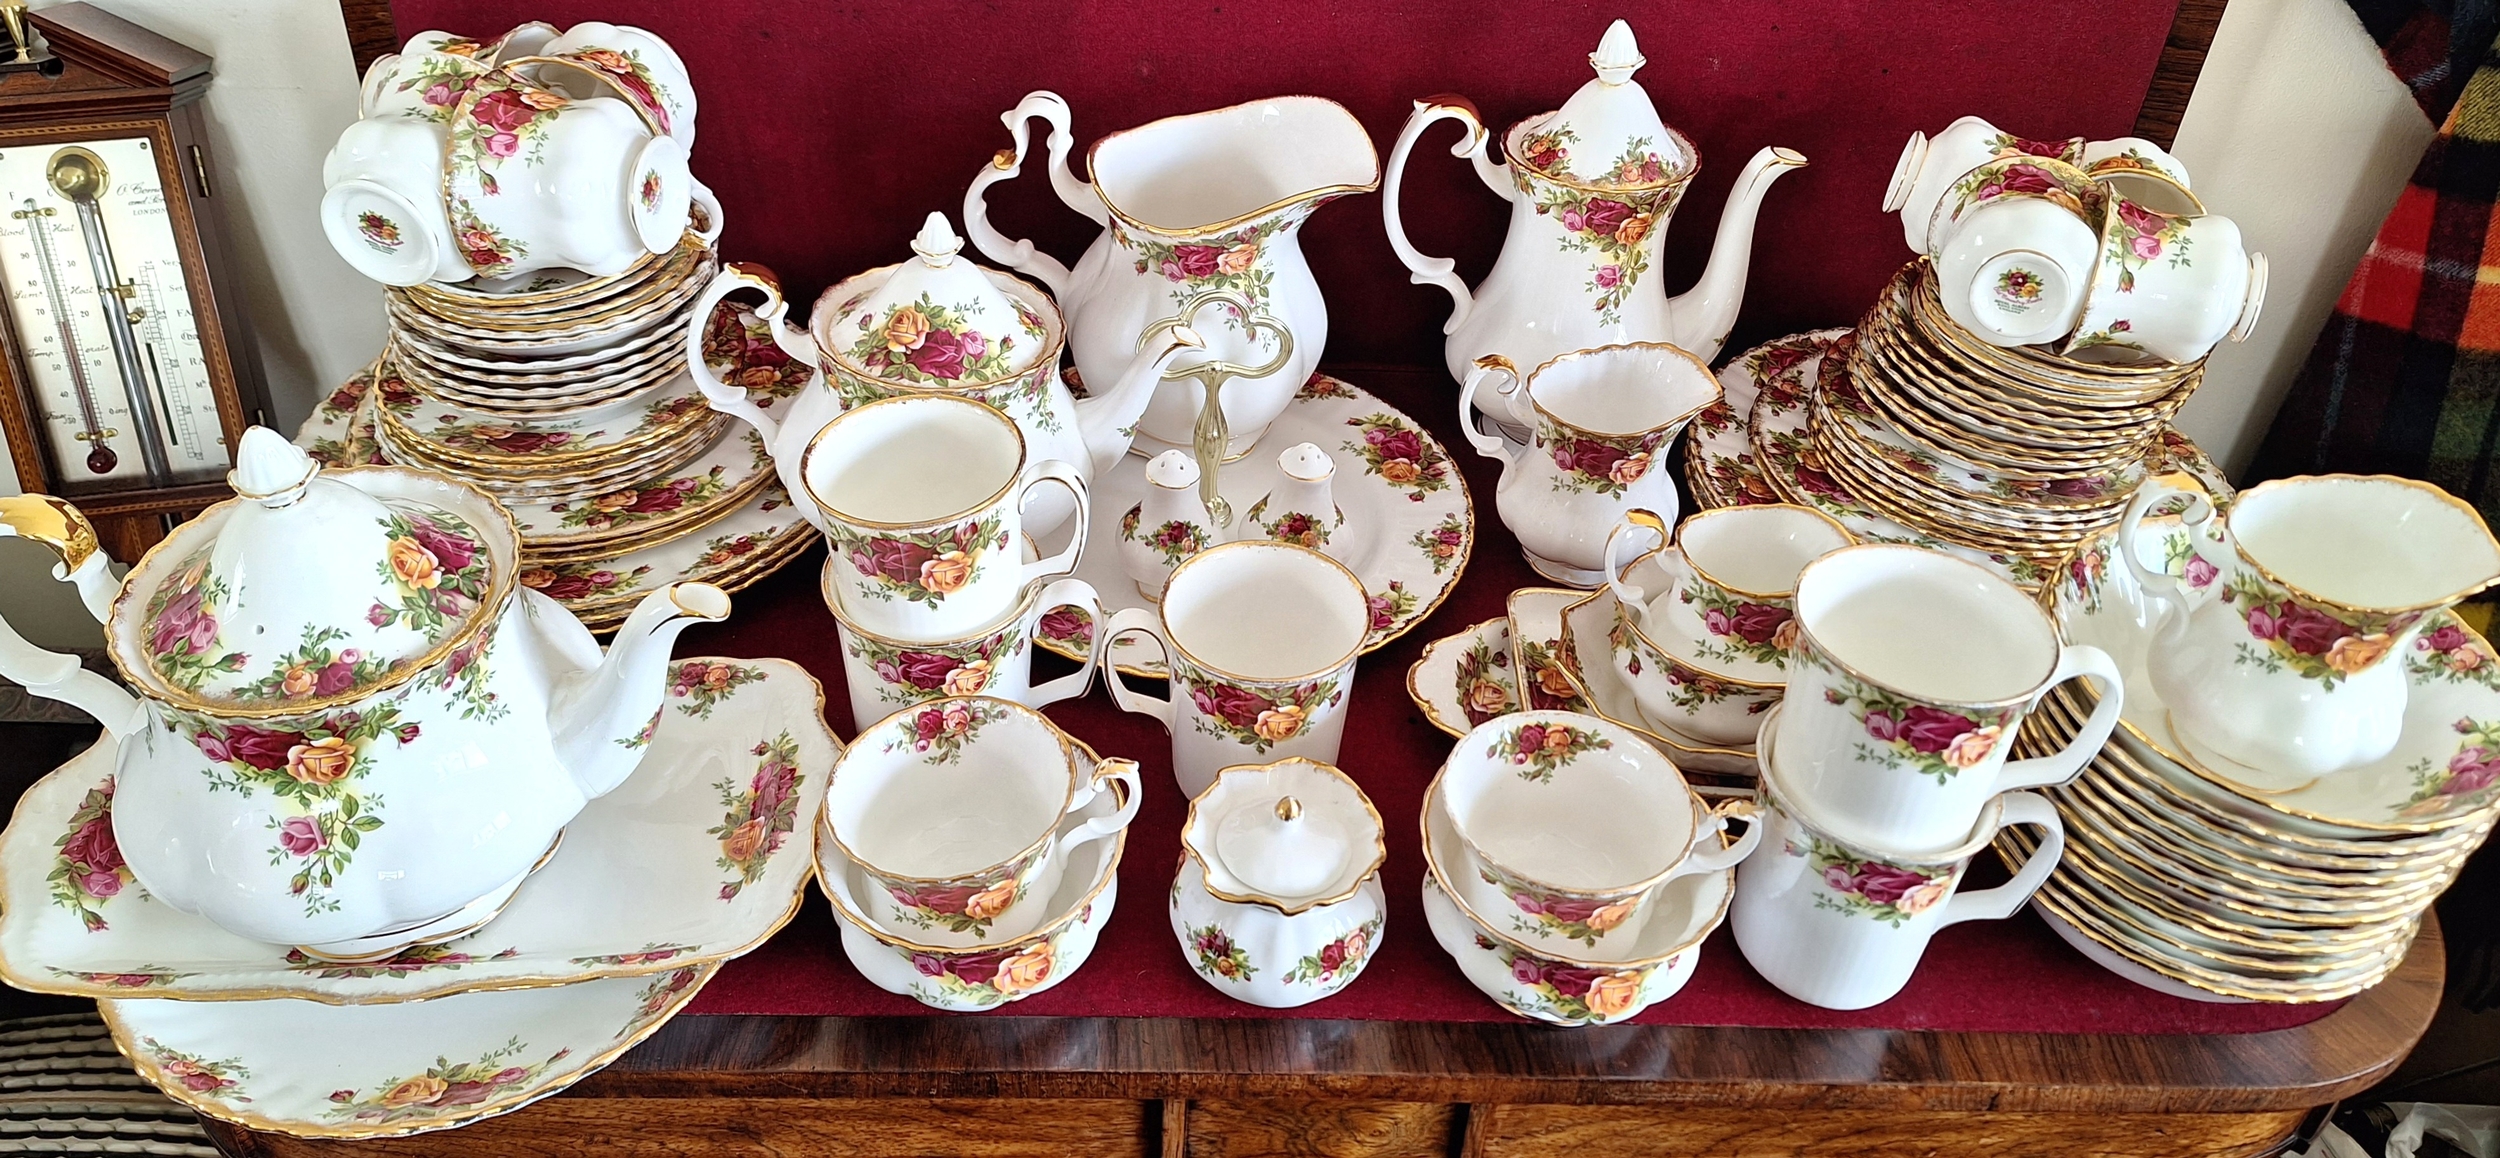 LARGE QUANTITY OF ROYAL ALBERT OLD COUNTRY ROSES TEA/DINNERWARE. APPROX. 90+ PIECES. ALL IN USED